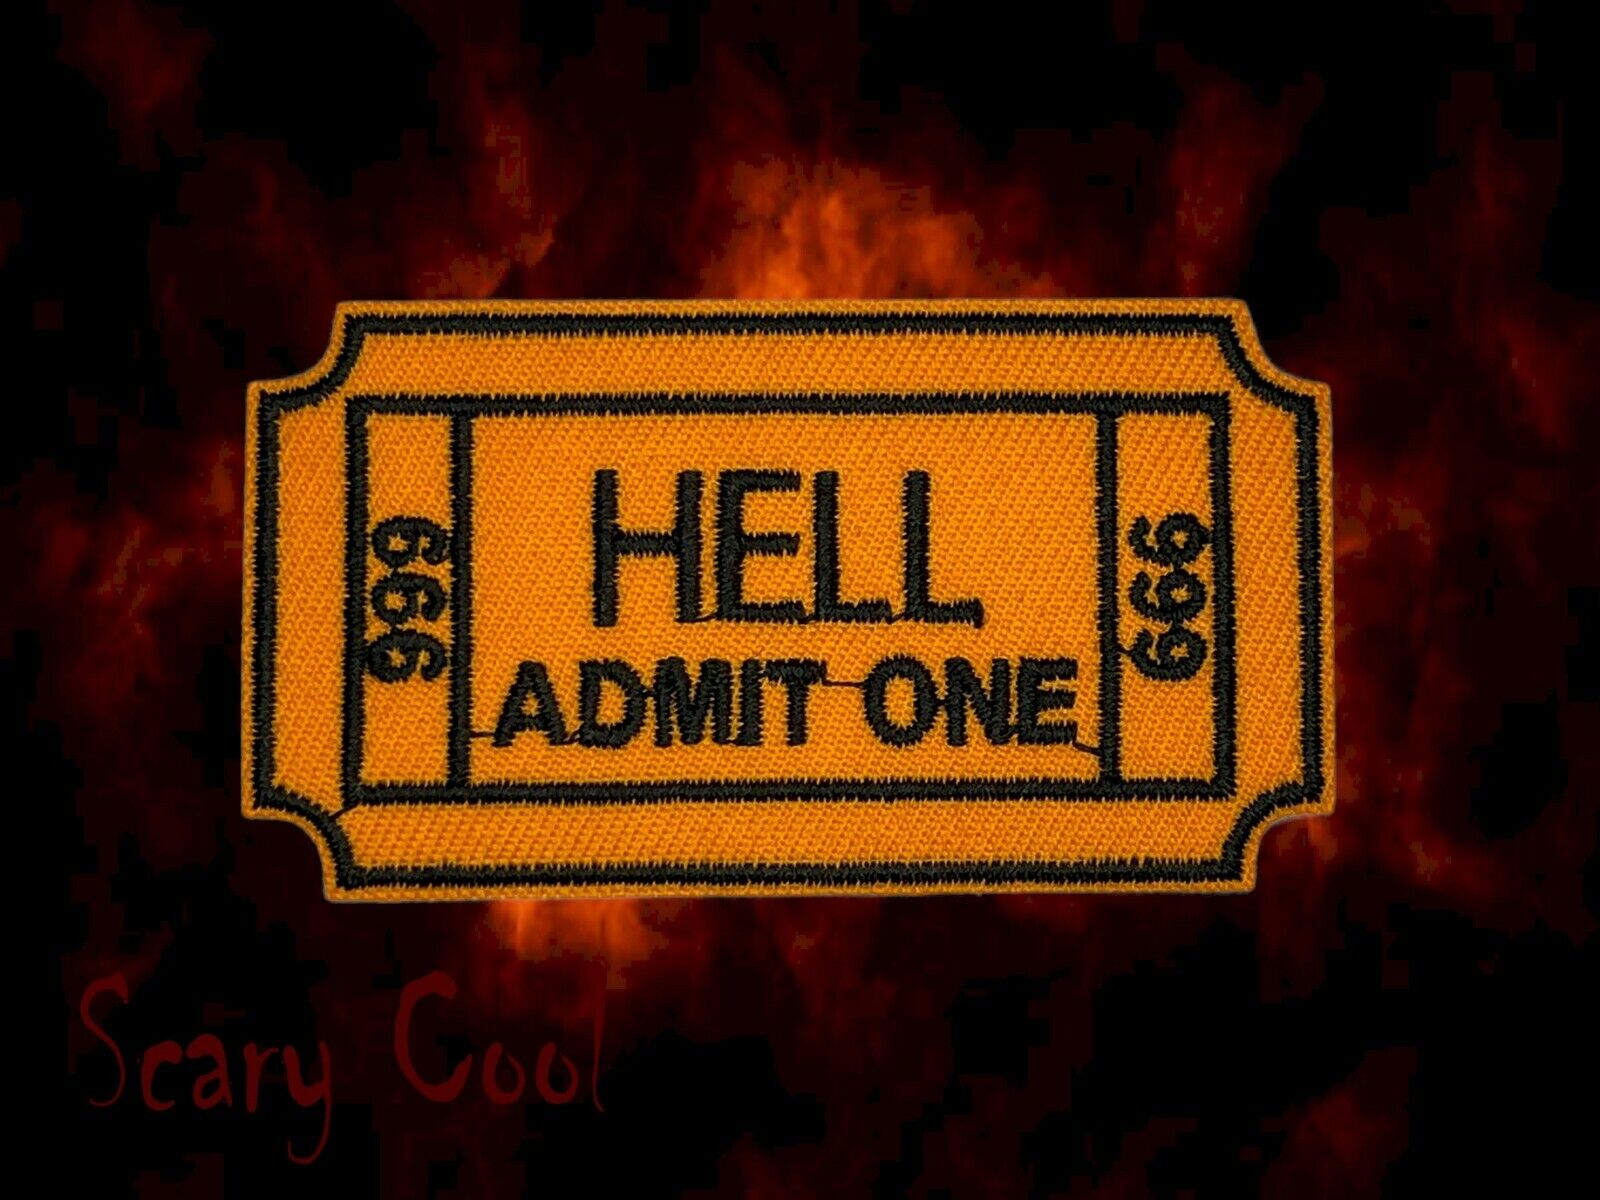 New Ticket Hell Admit One 666 Vintage Embroidered Biker Iron On Patch